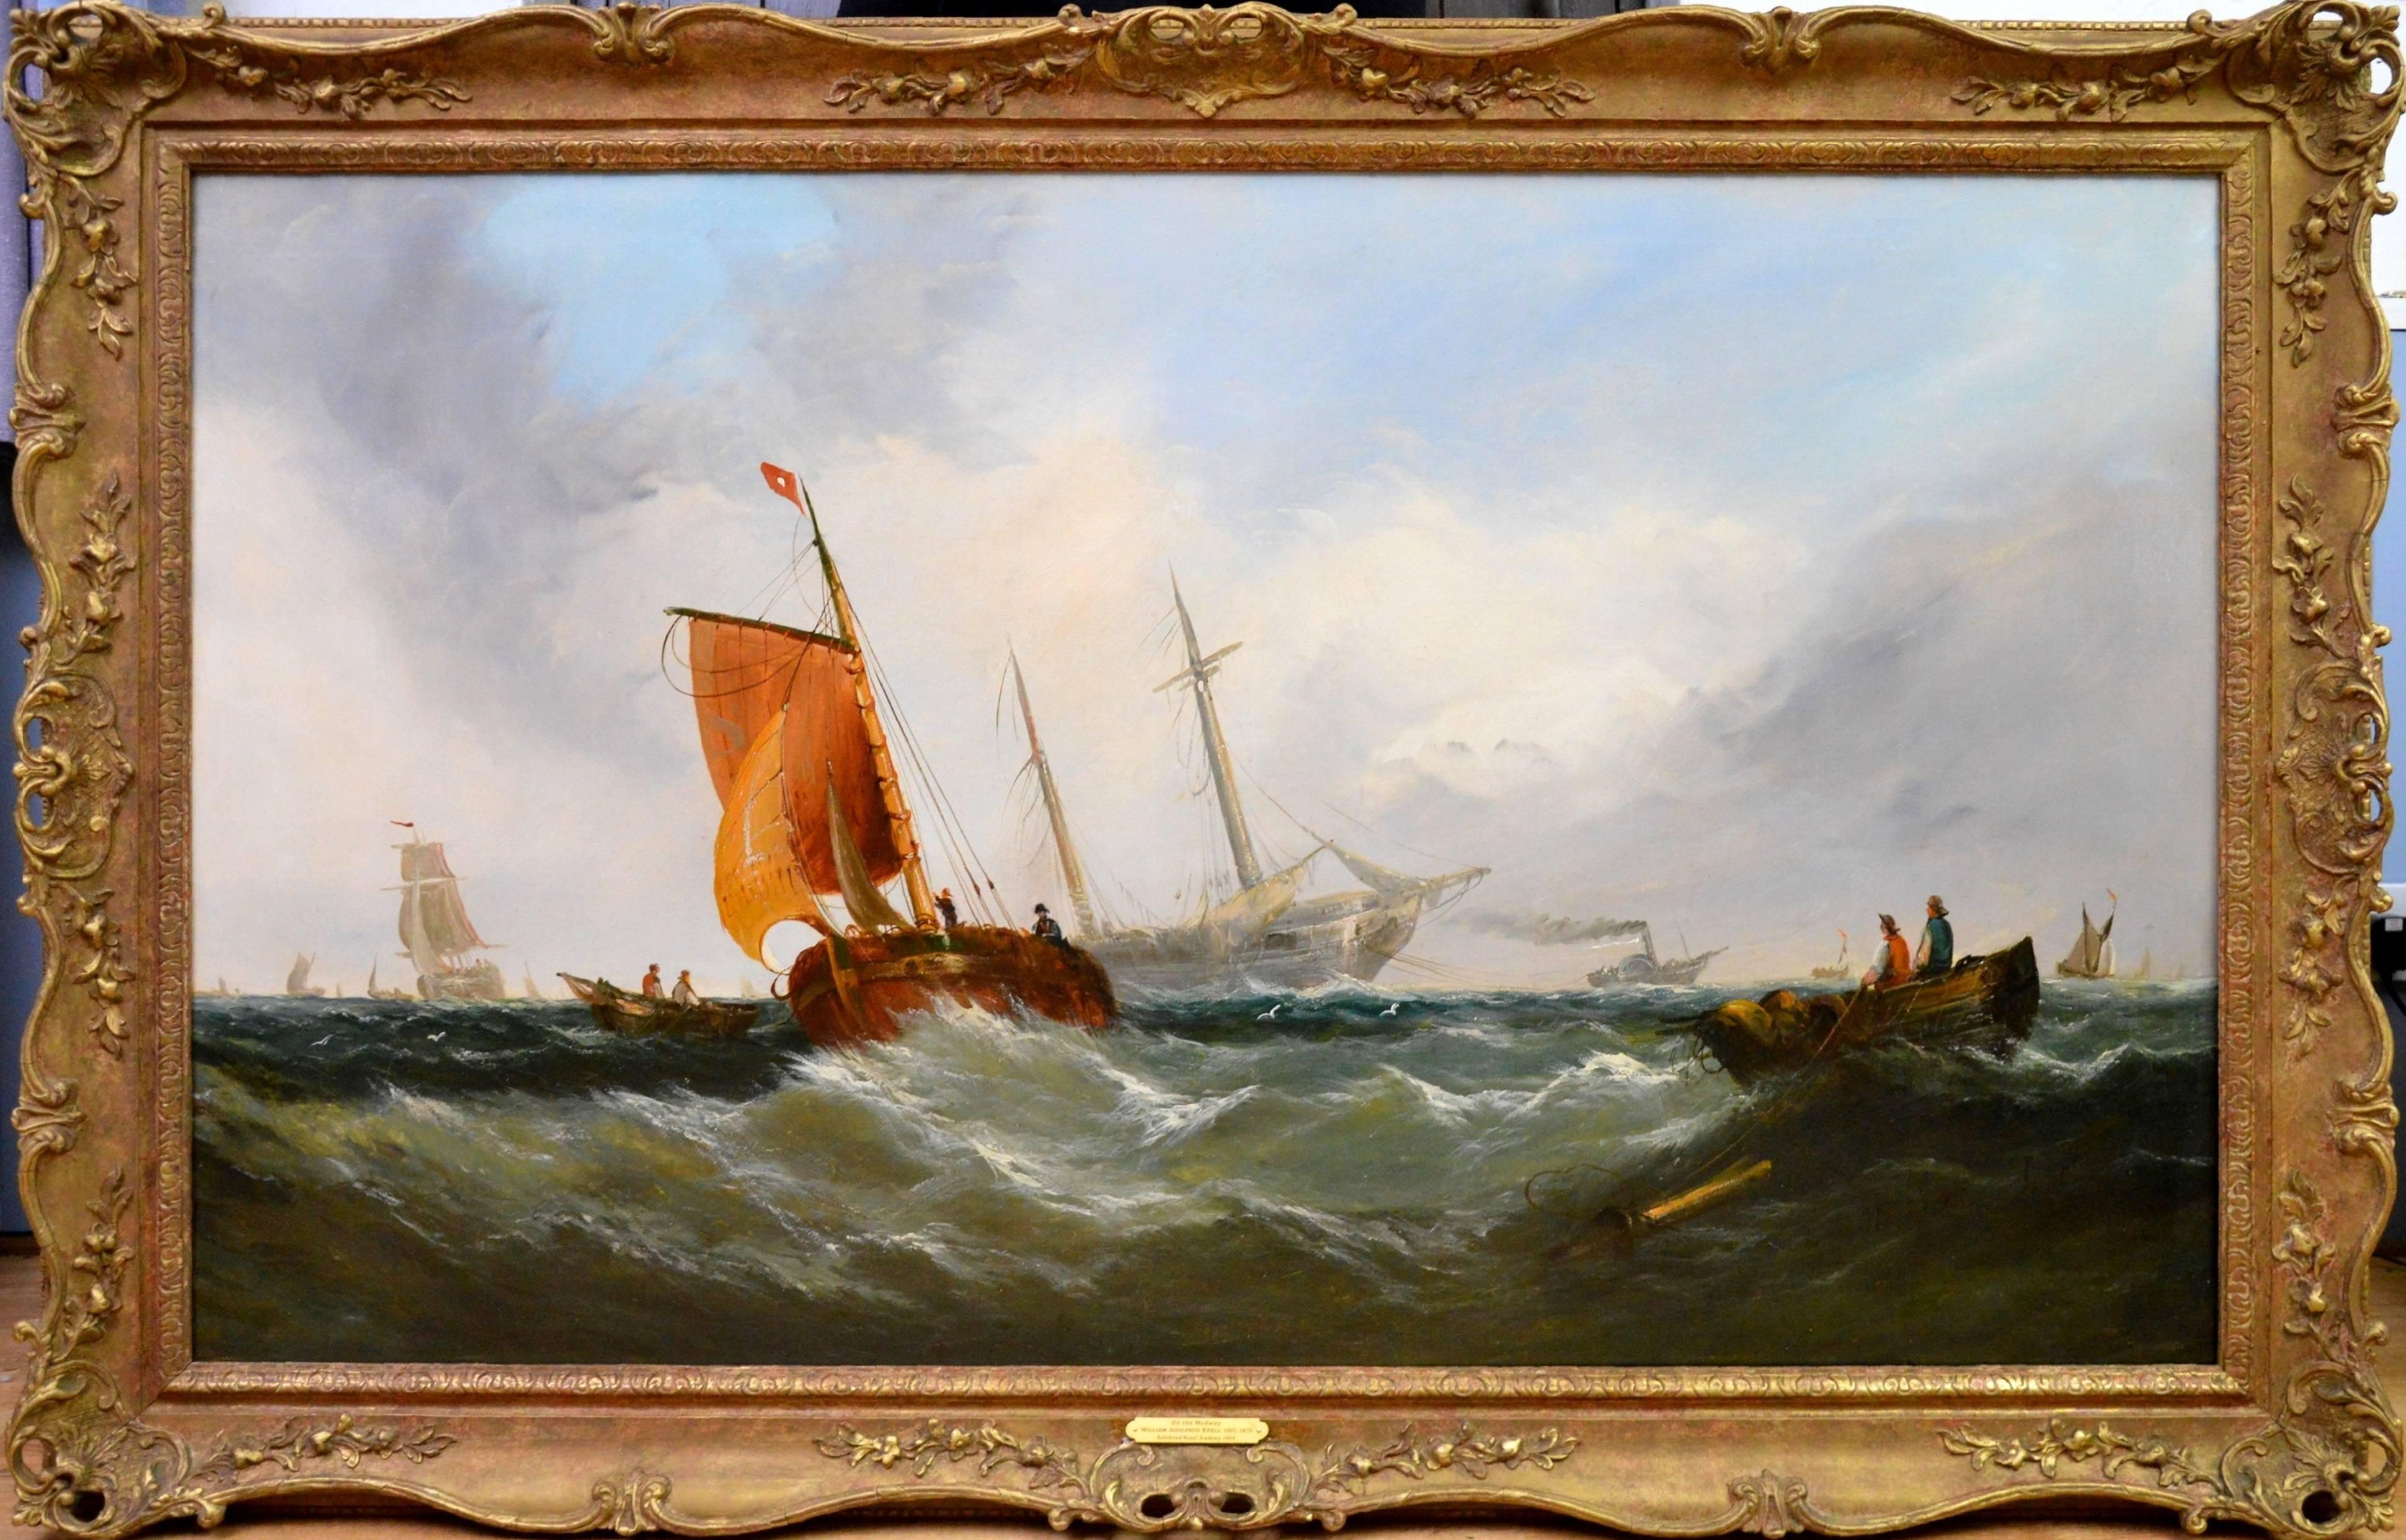 On the Medway - Exhibited at the Royal Academy in 1864 - Painting by William Adolphus Knell